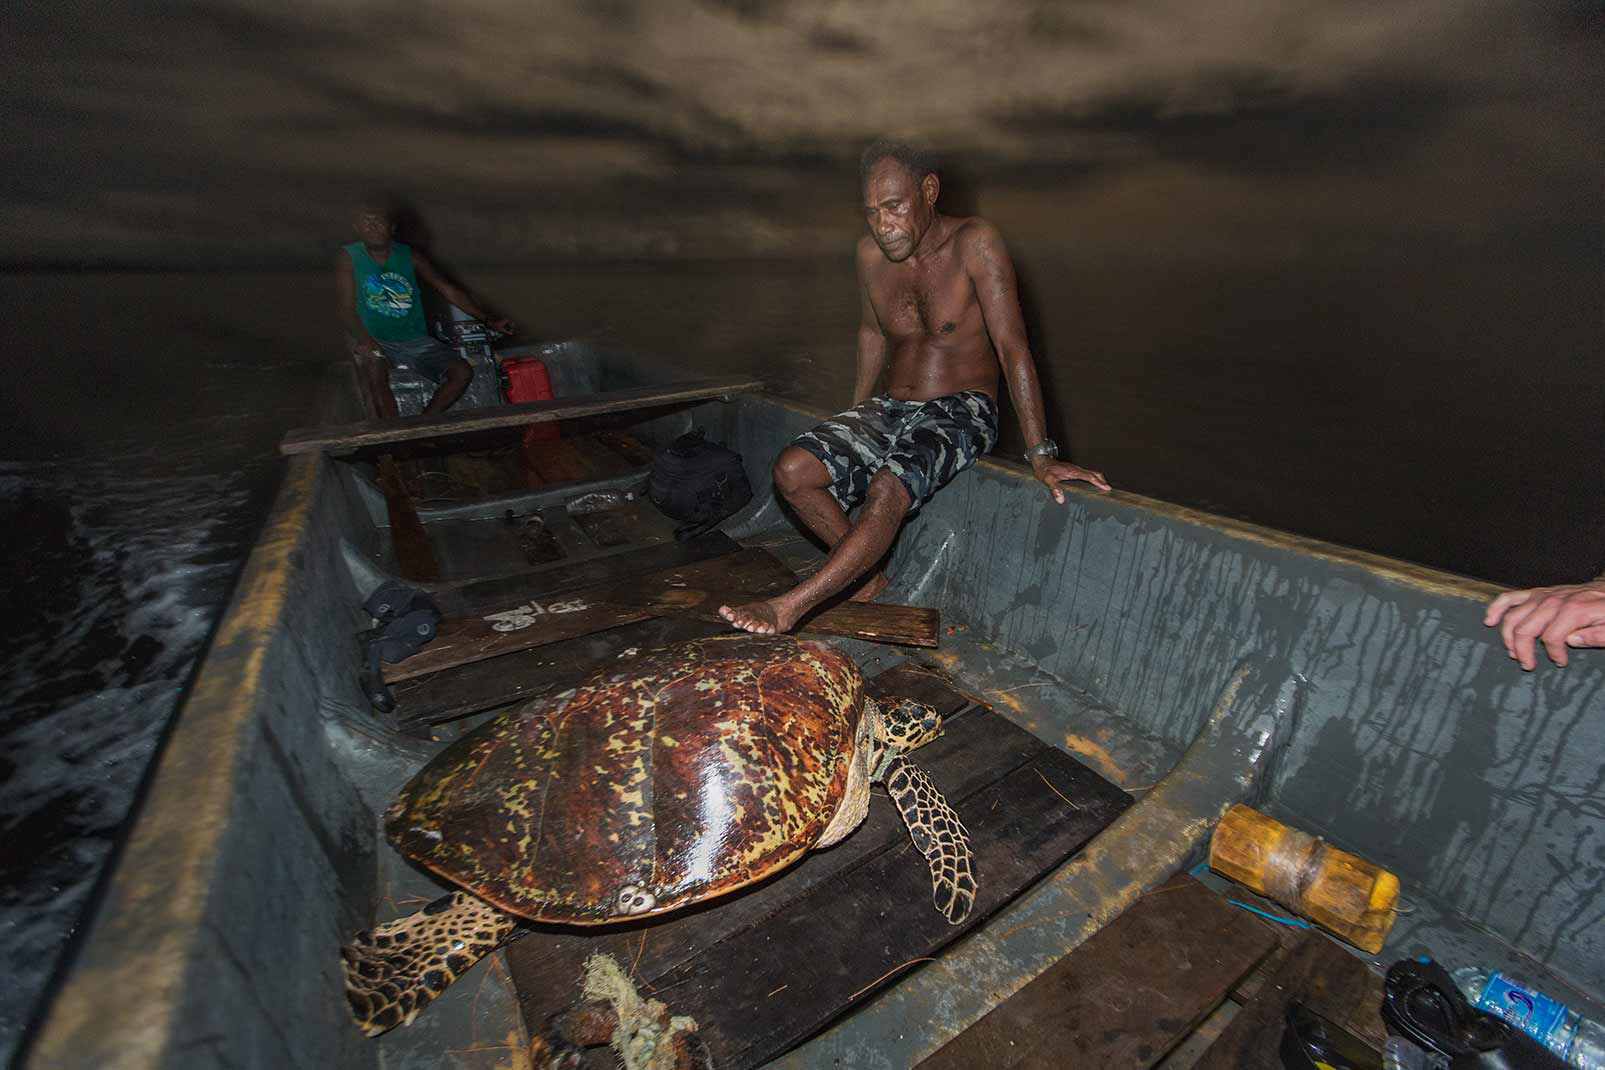 “The turtles come up on the beach at night to lay their eggs,” Calver says. Here Michael Gninigele brings an adult hawksbill sea turtle back to the station to note its vital signs before attaching a transmitter to its shell. The adult sea turtles grow to be massive—this one’s shell was four or five feet long, Calver says, and it weighed hundreds of pounds. By noting the animals’ measurements and general health, the researchers can better monitor the health of the population. Photo © Tim Calver